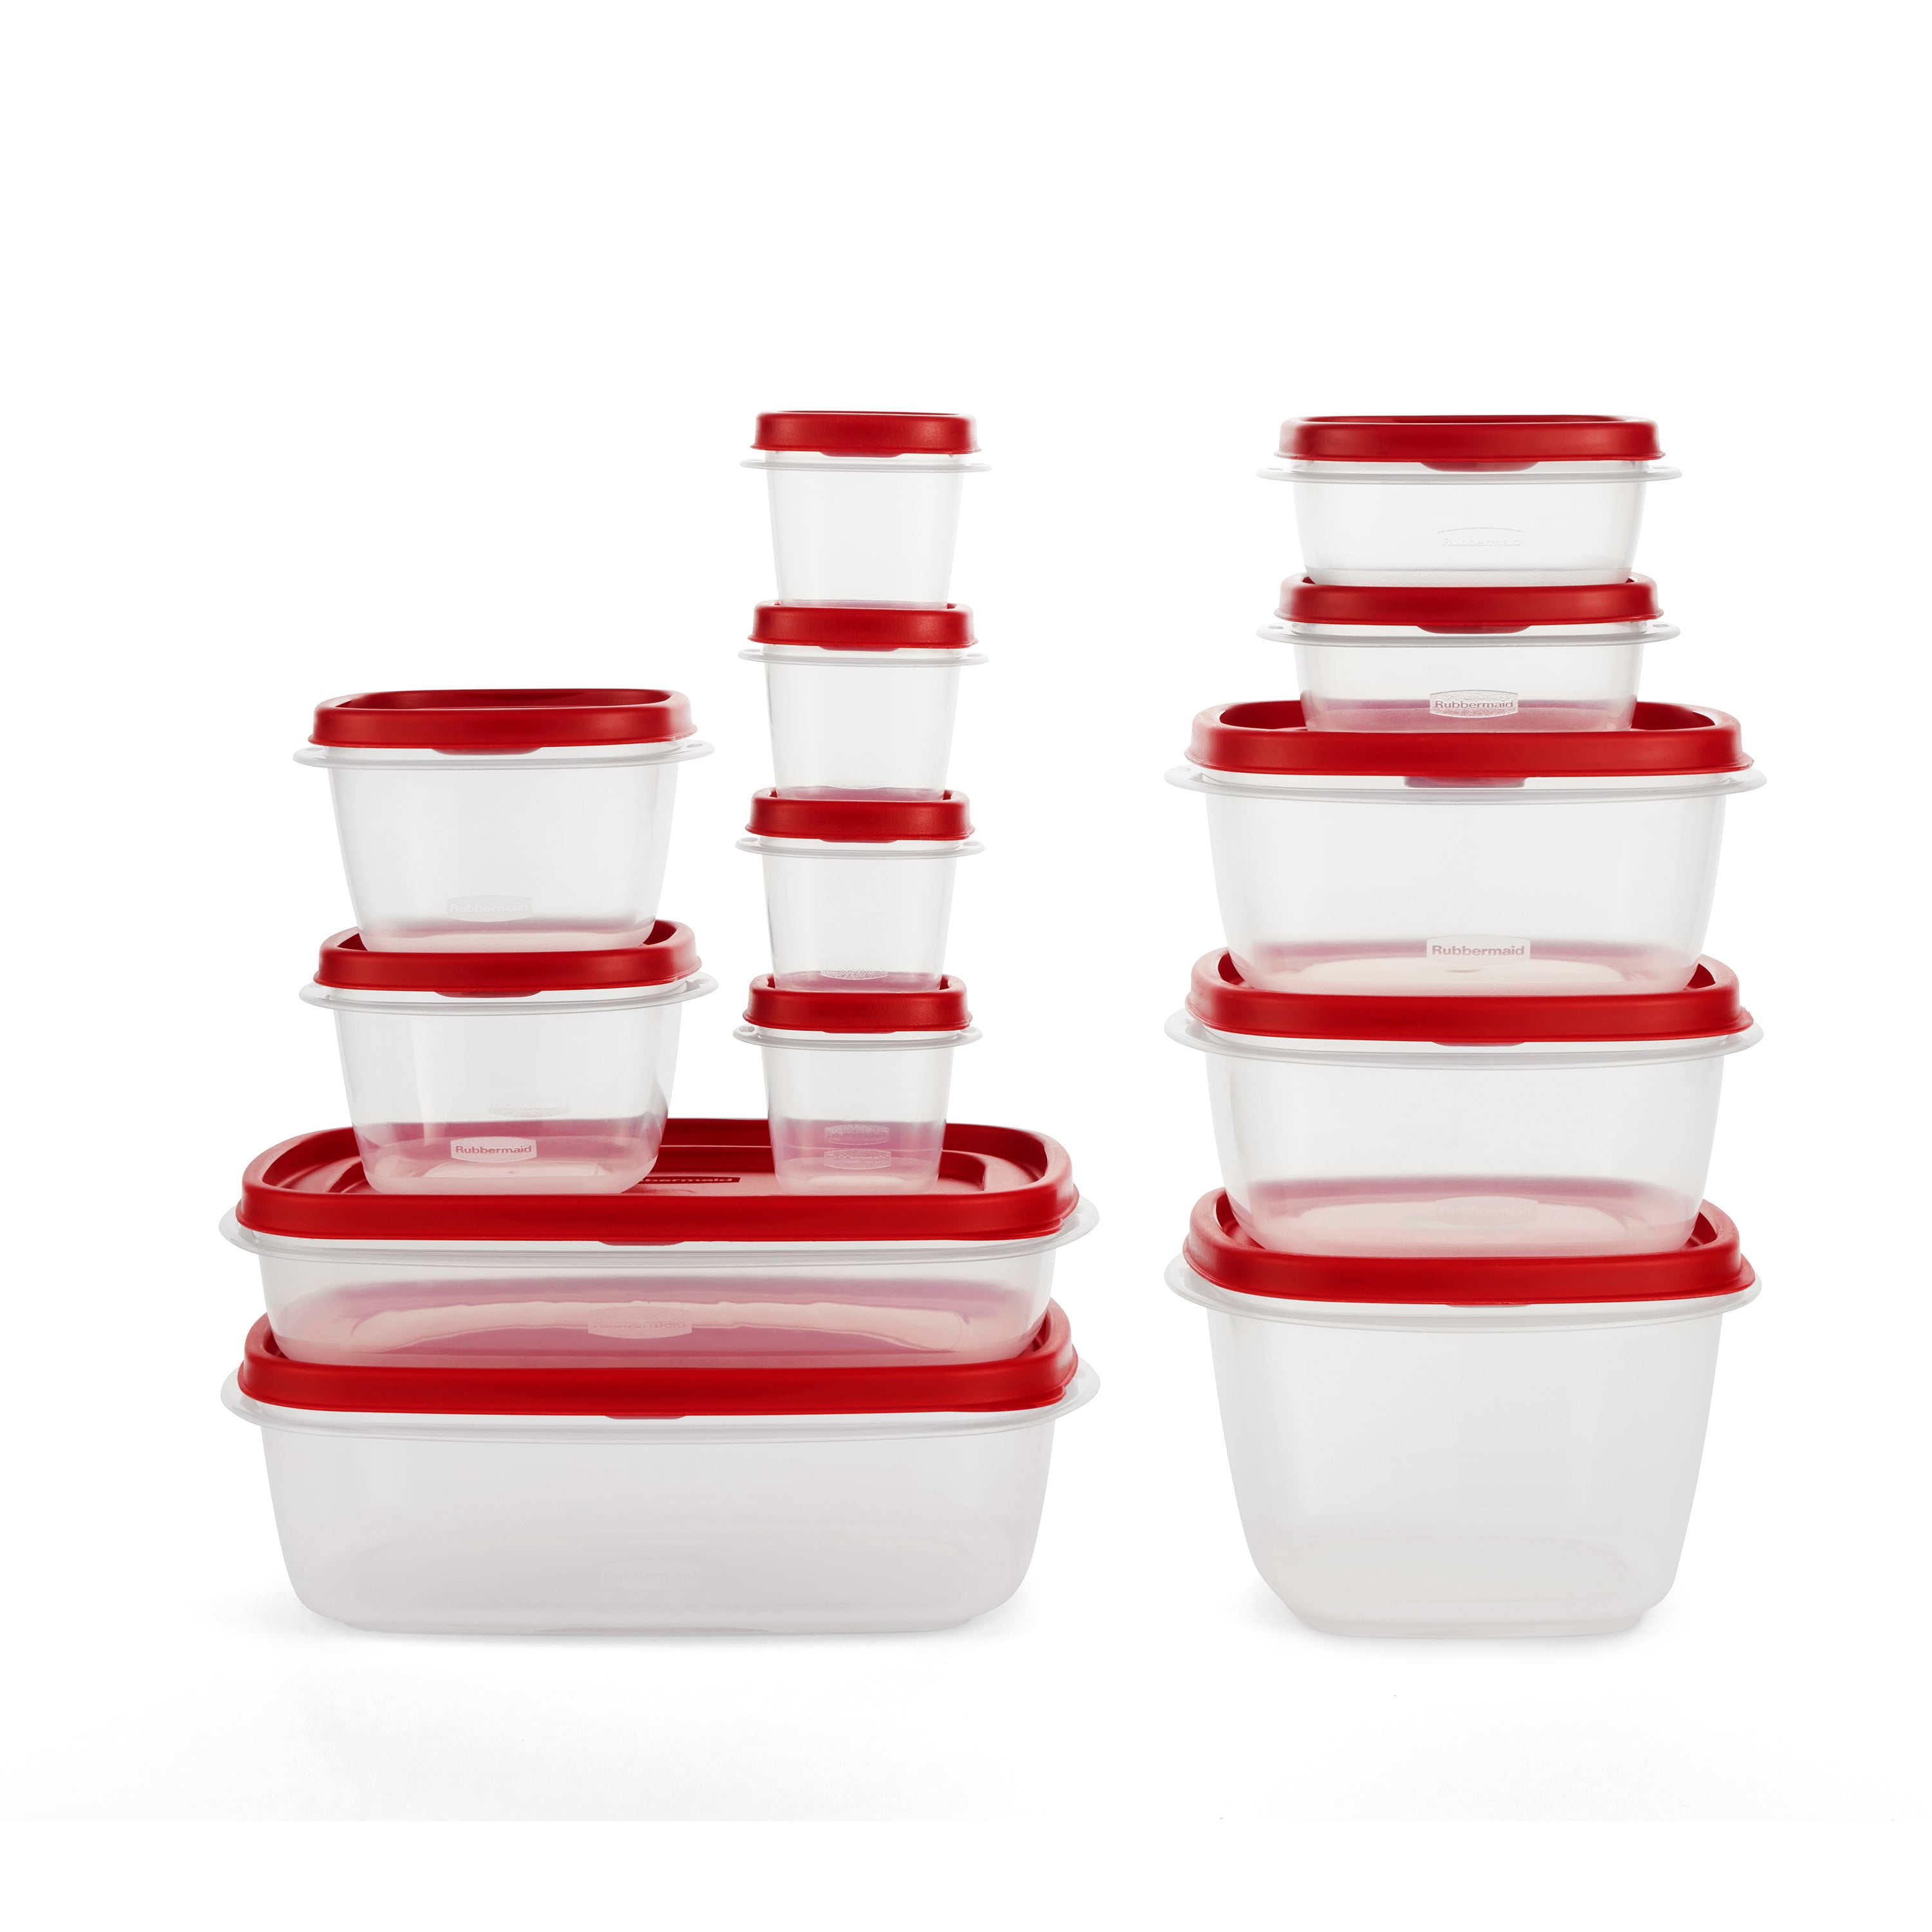  Rubbermaid 26 Piece Flex & Seal with Leak Proof Lids, Easy to  find, snaps right on to the bases, Blue: Home & Kitchen